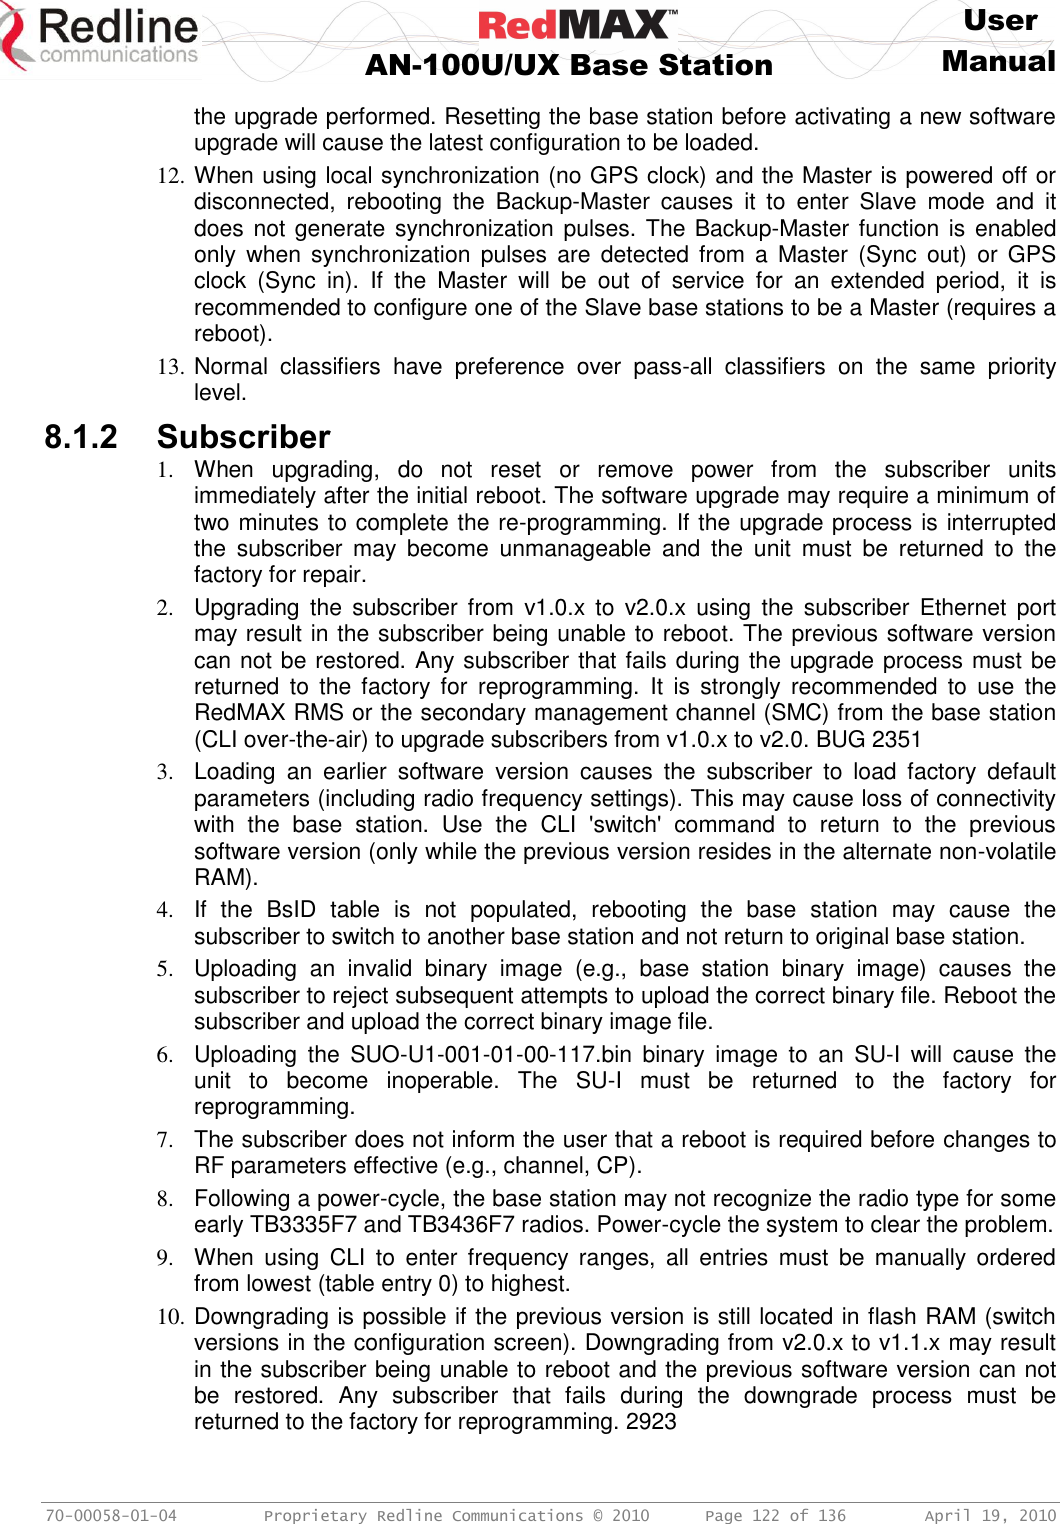     User  AN-100U/UX Base Station Manual   70-00058-01-04  Proprietary Redline Communications © 2010   Page 122 of 136  April 19, 2010 the upgrade performed. Resetting the base station before activating a new software upgrade will cause the latest configuration to be loaded. 12. When using local synchronization (no GPS clock) and the Master is powered off or disconnected,  rebooting  the  Backup-Master  causes  it  to  enter  Slave  mode  and  it does not generate synchronization pulses. The Backup-Master function is enabled only  when  synchronization pulses  are  detected  from  a  Master  (Sync  out)  or  GPS clock  (Sync  in).  If  the  Master  will  be  out  of  service  for  an  extended  period,  it  is recommended to configure one of the Slave base stations to be a Master (requires a reboot). 13. Normal  classifiers  have  preference  over  pass-all  classifiers  on  the  same  priority level. 8.1.2 Subscriber 1.  When  upgrading,  do  not  reset  or  remove  power  from  the  subscriber  units immediately after the initial reboot. The software upgrade may require a minimum of two minutes to complete the re-programming. If the upgrade process is interrupted the  subscriber  may  become  unmanageable  and  the  unit  must  be  returned  to  the factory for repair. 2.  Upgrading  the  subscriber from  v1.0.x to  v2.0.x  using  the  subscriber Ethernet  port may result in the subscriber being unable to reboot. The previous software version can not be restored. Any subscriber that fails during the upgrade process must be returned  to  the factory  for  reprogramming.  It  is  strongly  recommended  to  use  the RedMAX RMS or the secondary management channel (SMC) from the base station (CLI over-the-air) to upgrade subscribers from v1.0.x to v2.0. BUG 2351 3.  Loading  an  earlier  software  version  causes  the  subscriber  to  load  factory  default parameters (including radio frequency settings). This may cause loss of connectivity with  the  base  station.  Use  the  CLI  &apos;switch&apos;  command  to  return  to  the  previous software version (only while the previous version resides in the alternate non-volatile RAM). 4.  If  the  BsID  table  is  not  populated,  rebooting  the  base  station  may  cause  the subscriber to switch to another base station and not return to original base station.  5.  Uploading  an  invalid  binary  image  (e.g.,  base  station  binary  image)  causes  the subscriber to reject subsequent attempts to upload the correct binary file. Reboot the subscriber and upload the correct binary image file. 6.  Uploading  the  SUO-U1-001-01-00-117.bin  binary  image  to  an  SU-I  will  cause  the unit  to  become  inoperable.  The  SU-I  must  be  returned  to  the  factory  for reprogramming. 7.  The subscriber does not inform the user that a reboot is required before changes to RF parameters effective (e.g., channel, CP). 8.  Following a power-cycle, the base station may not recognize the radio type for some early TB3335F7 and TB3436F7 radios. Power-cycle the system to clear the problem. 9.  When  using  CLI  to  enter  frequency  ranges,  all  entries  must  be  manually  ordered from lowest (table entry 0) to highest. 10. Downgrading is possible if the previous version is still located in flash RAM (switch versions in the configuration screen). Downgrading from v2.0.x to v1.1.x may result in the subscriber being unable to reboot and the previous software version can not be  restored.  Any  subscriber  that  fails  during  the  downgrade  process  must  be returned to the factory for reprogramming. 2923 